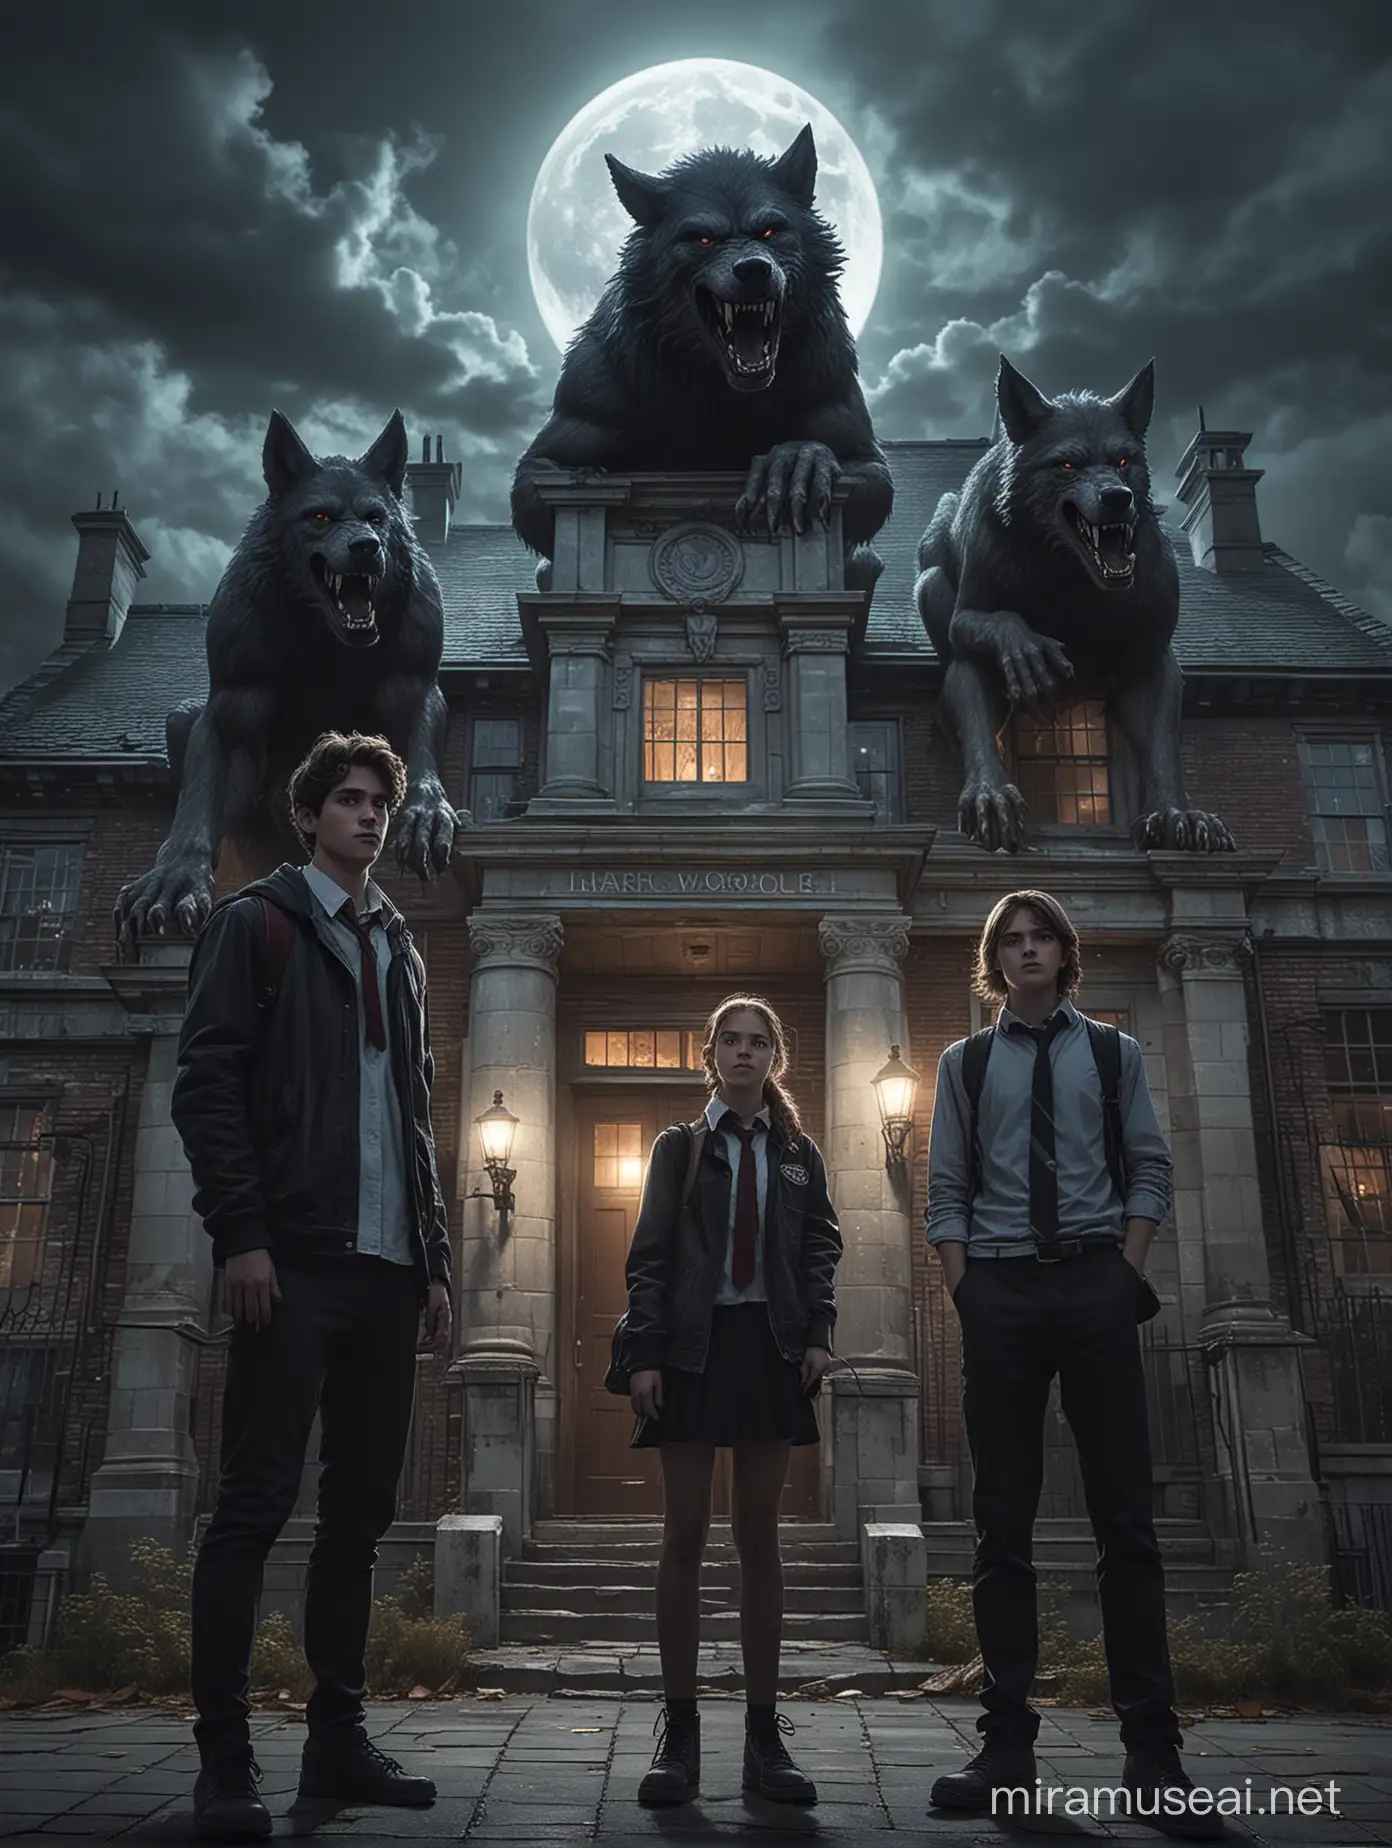 Three students standing outside a dark mythical high school, with mighty werewolves behind them and on the roof of the building